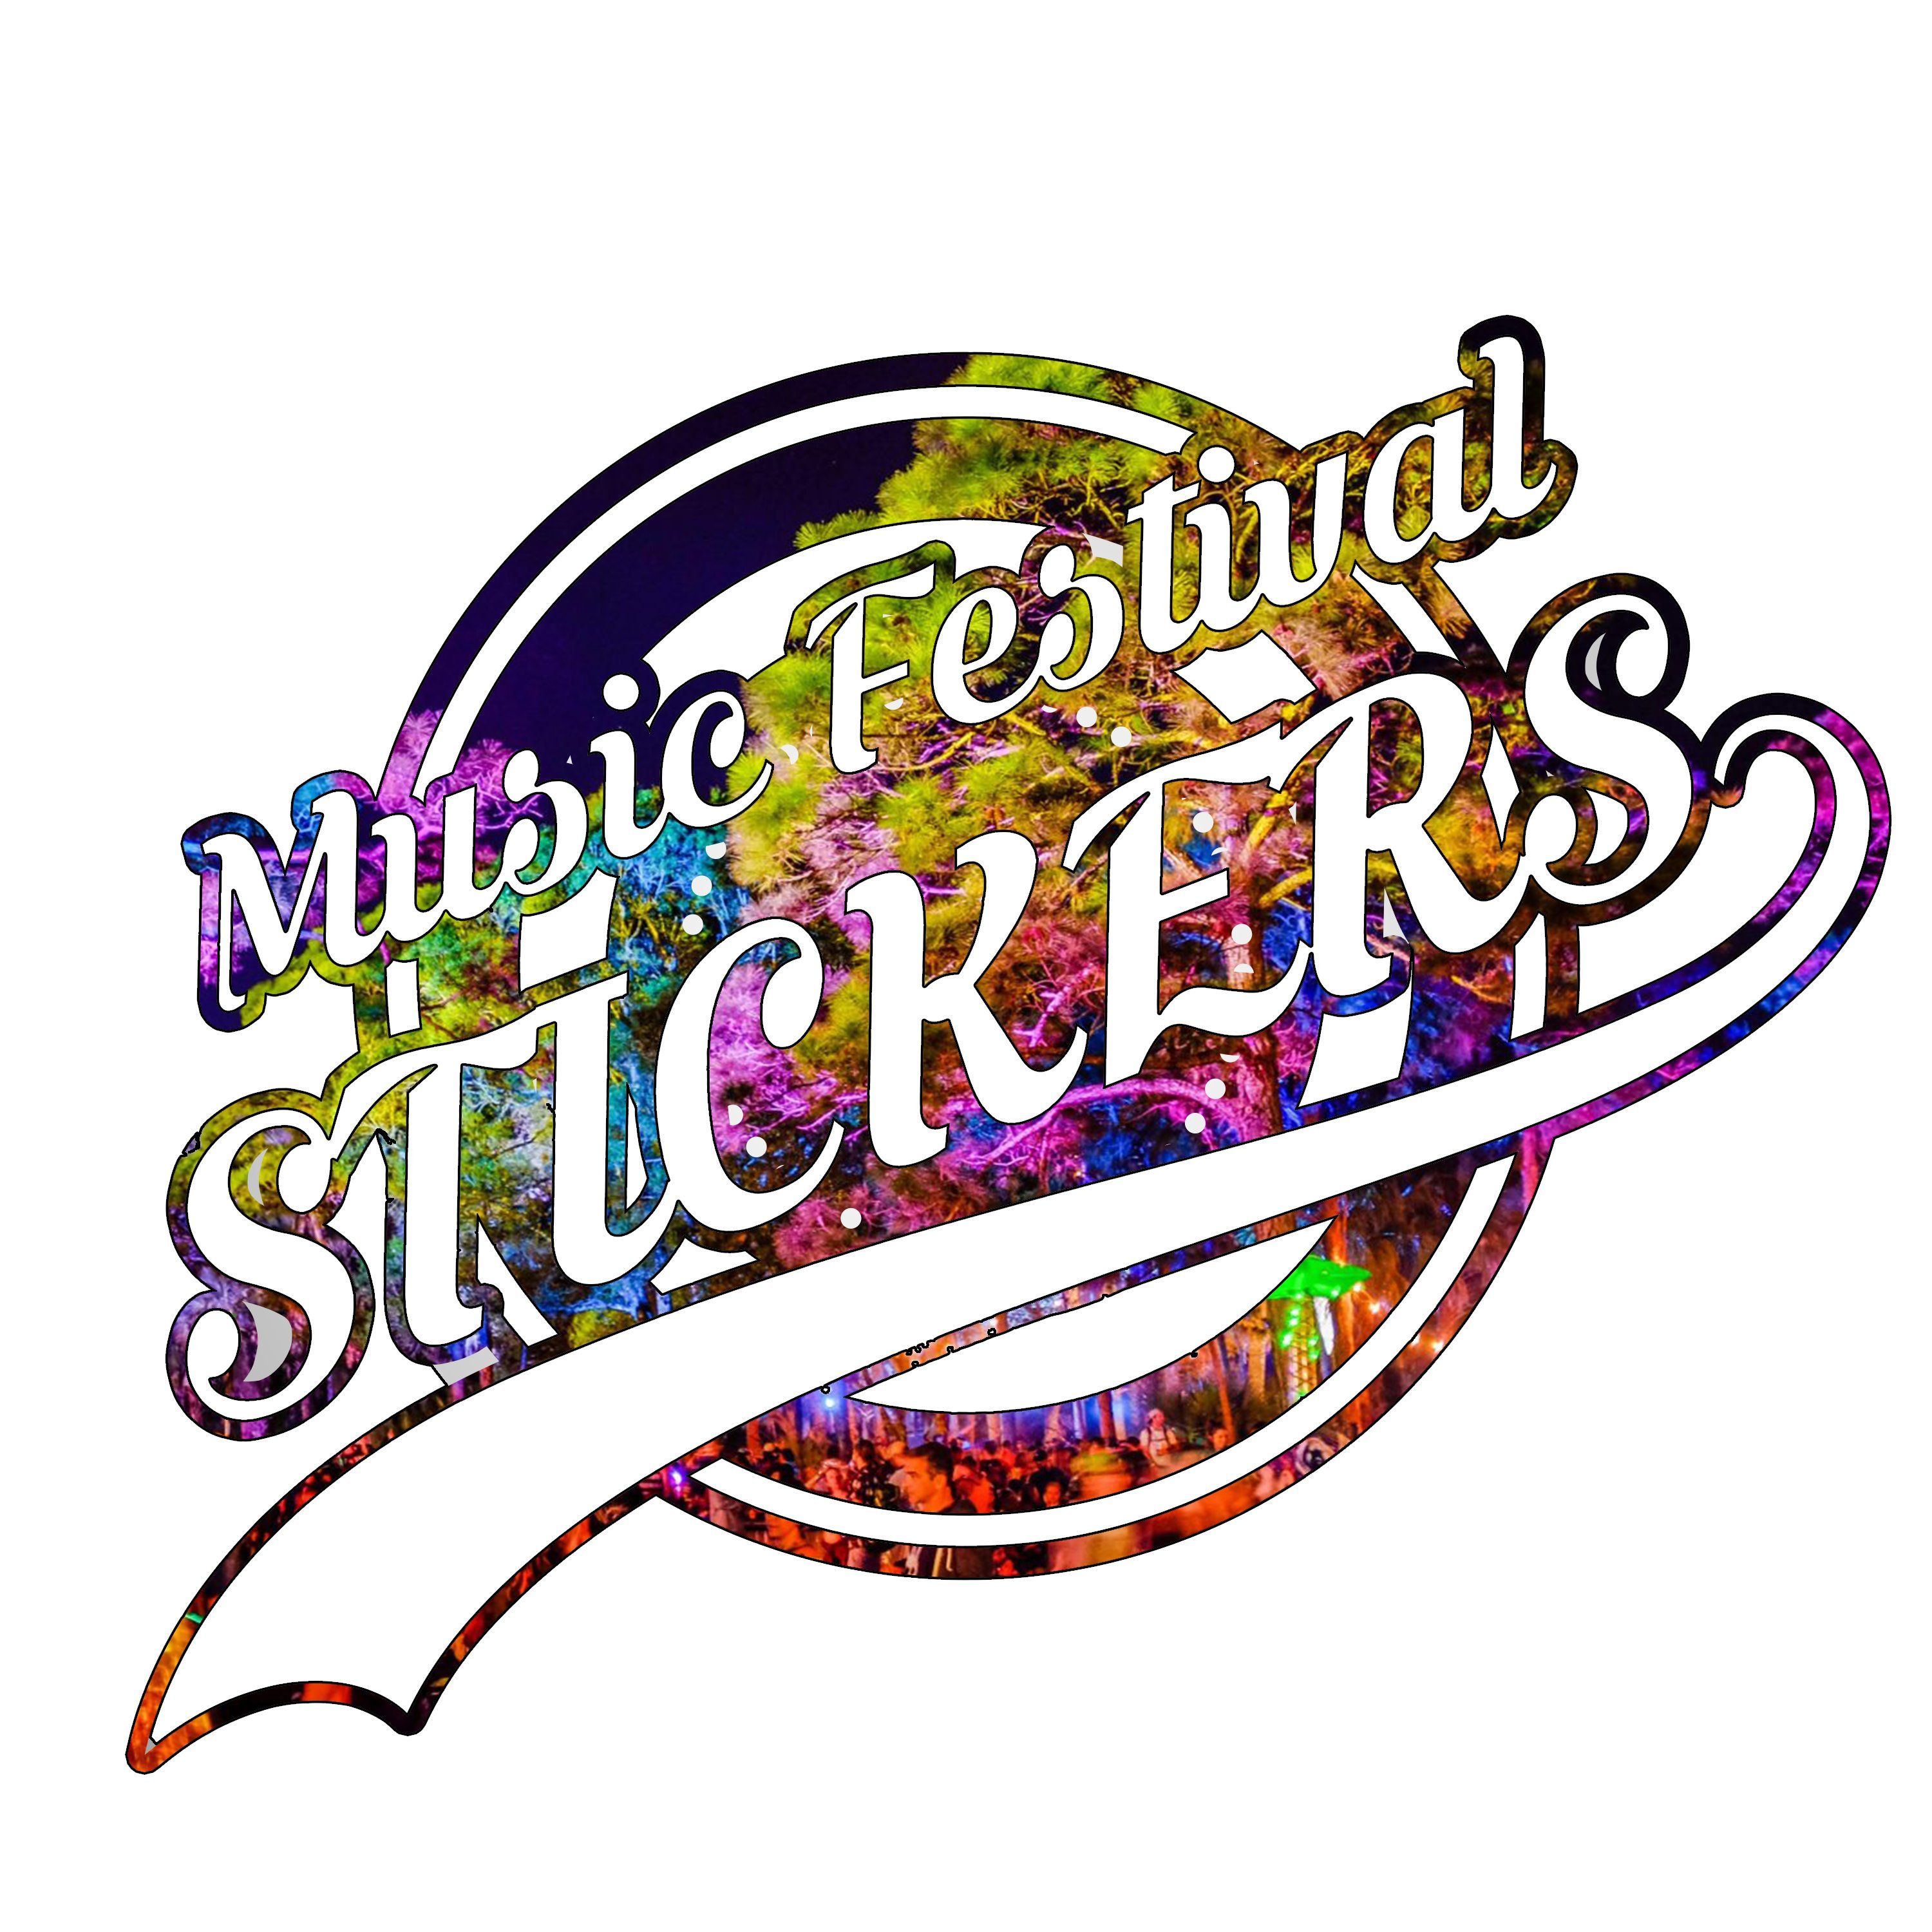 Making stickers to give out and make people smile! follow my Instagram @musicfestivalstickers I have way more cool stuff there